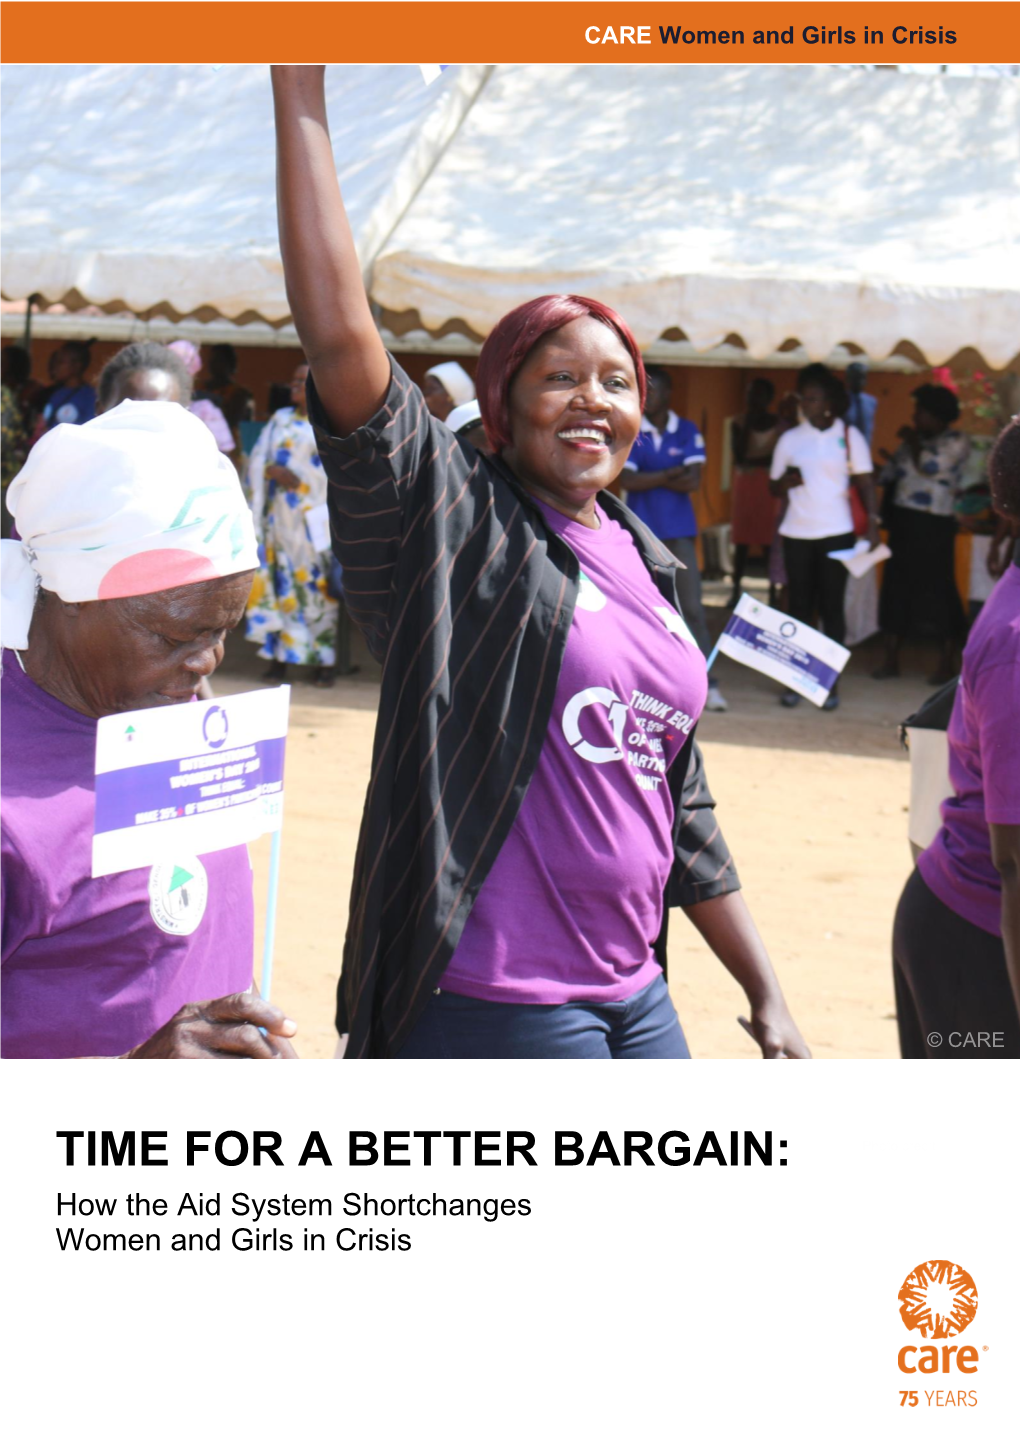 Time for a Better Bargain: How the Aid System Shortchanges Women And